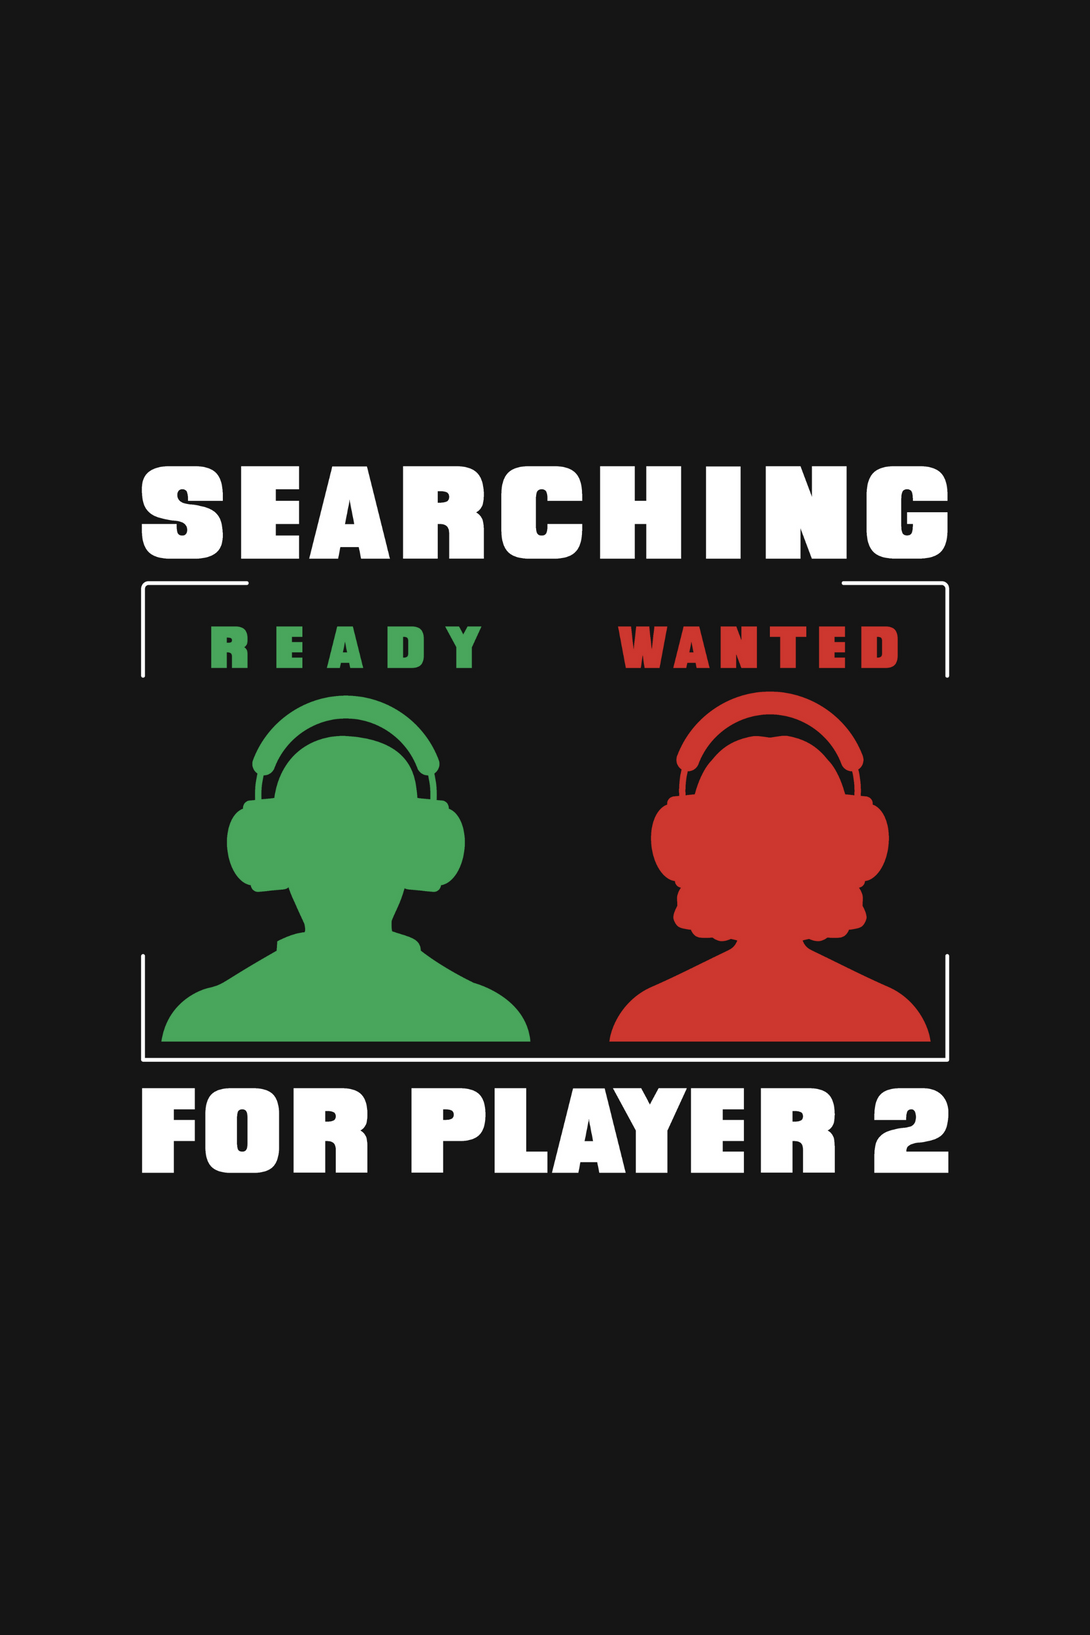 Searching For Player 2 Black Printed Oversized T-Shirt For Men - WowWaves - 1